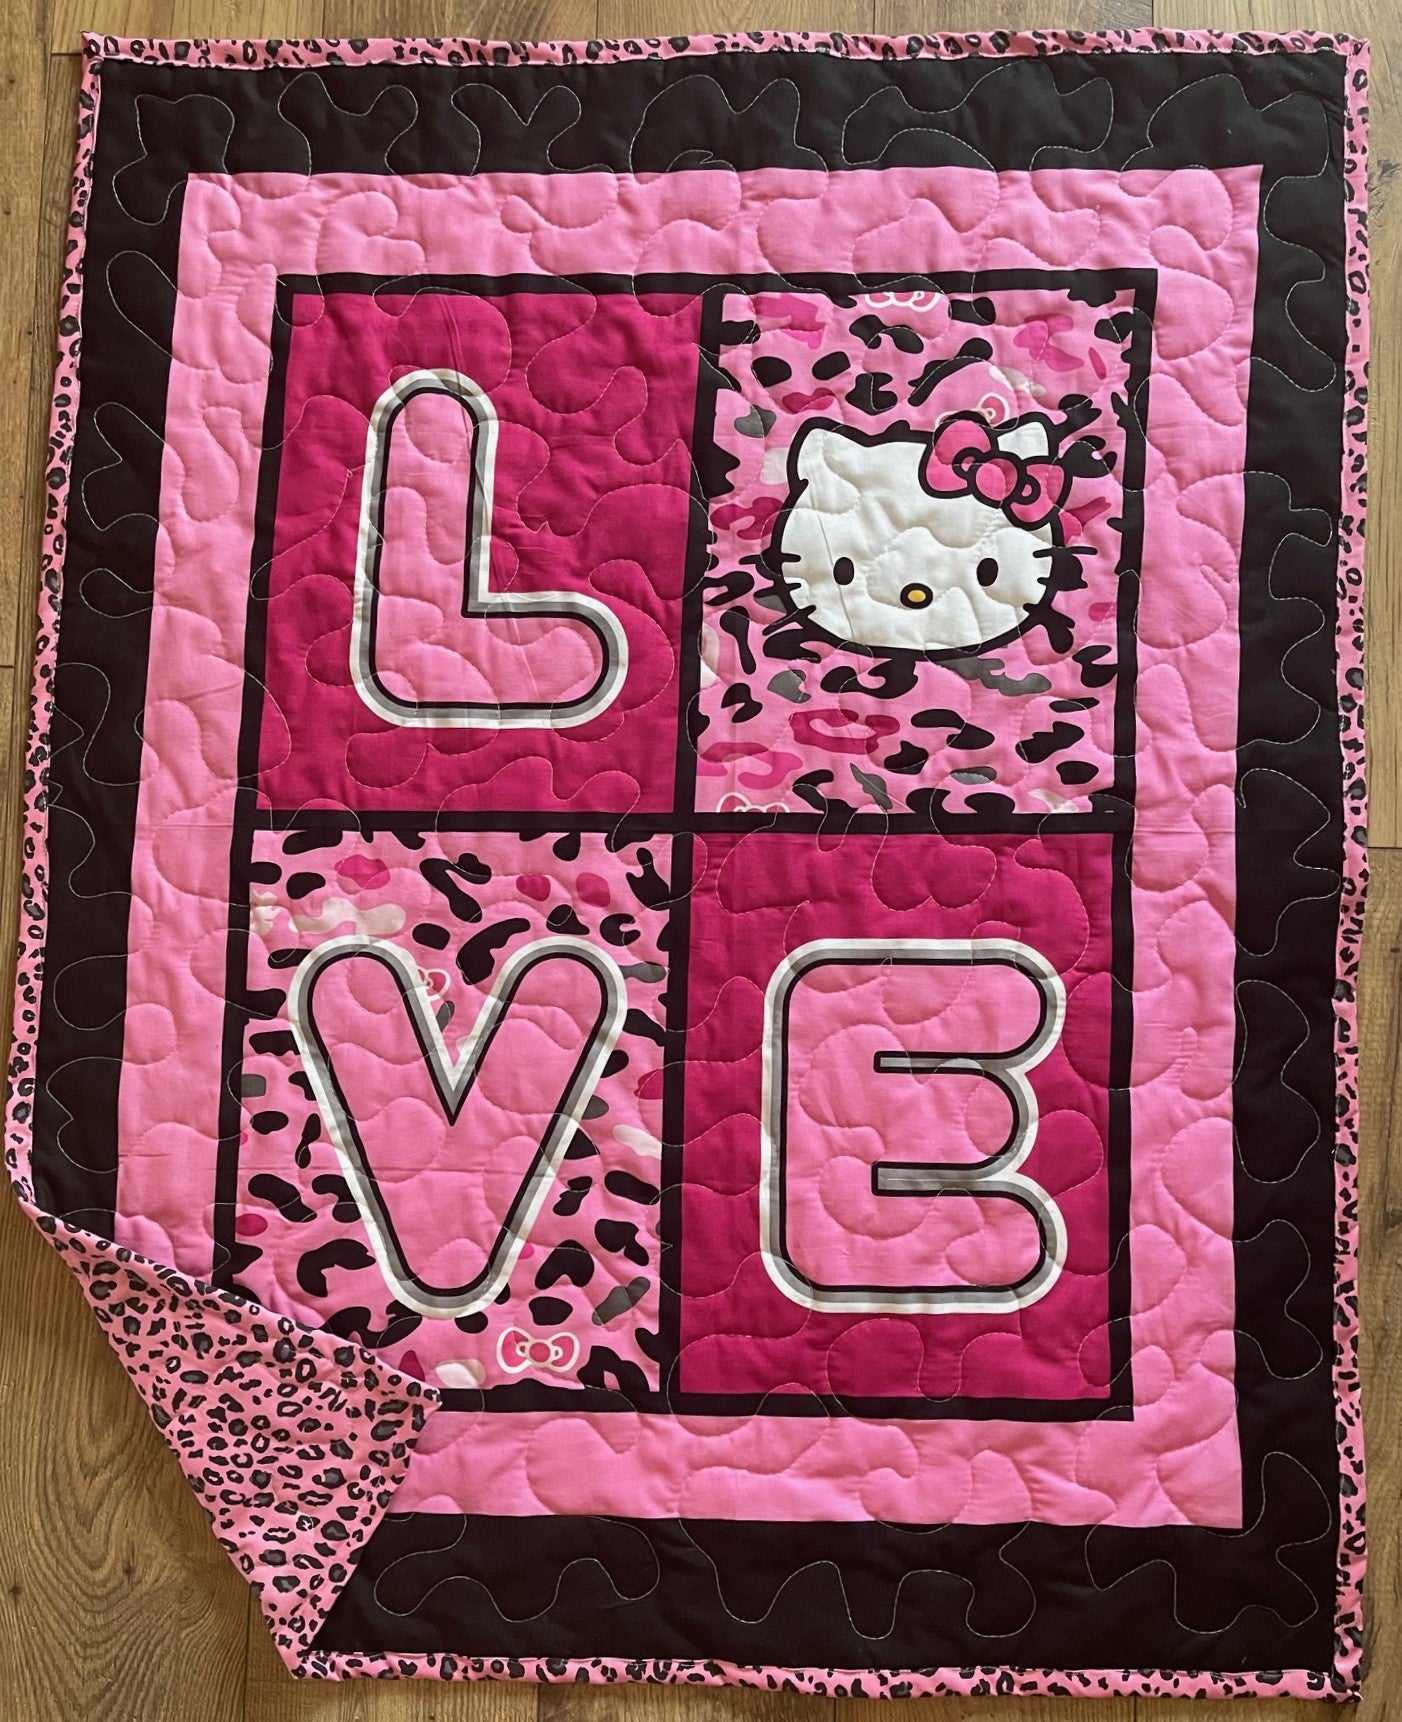 HELLO KITTY LOVE PINK CHEETAH Quilted Blanket 1 AVAILABLE